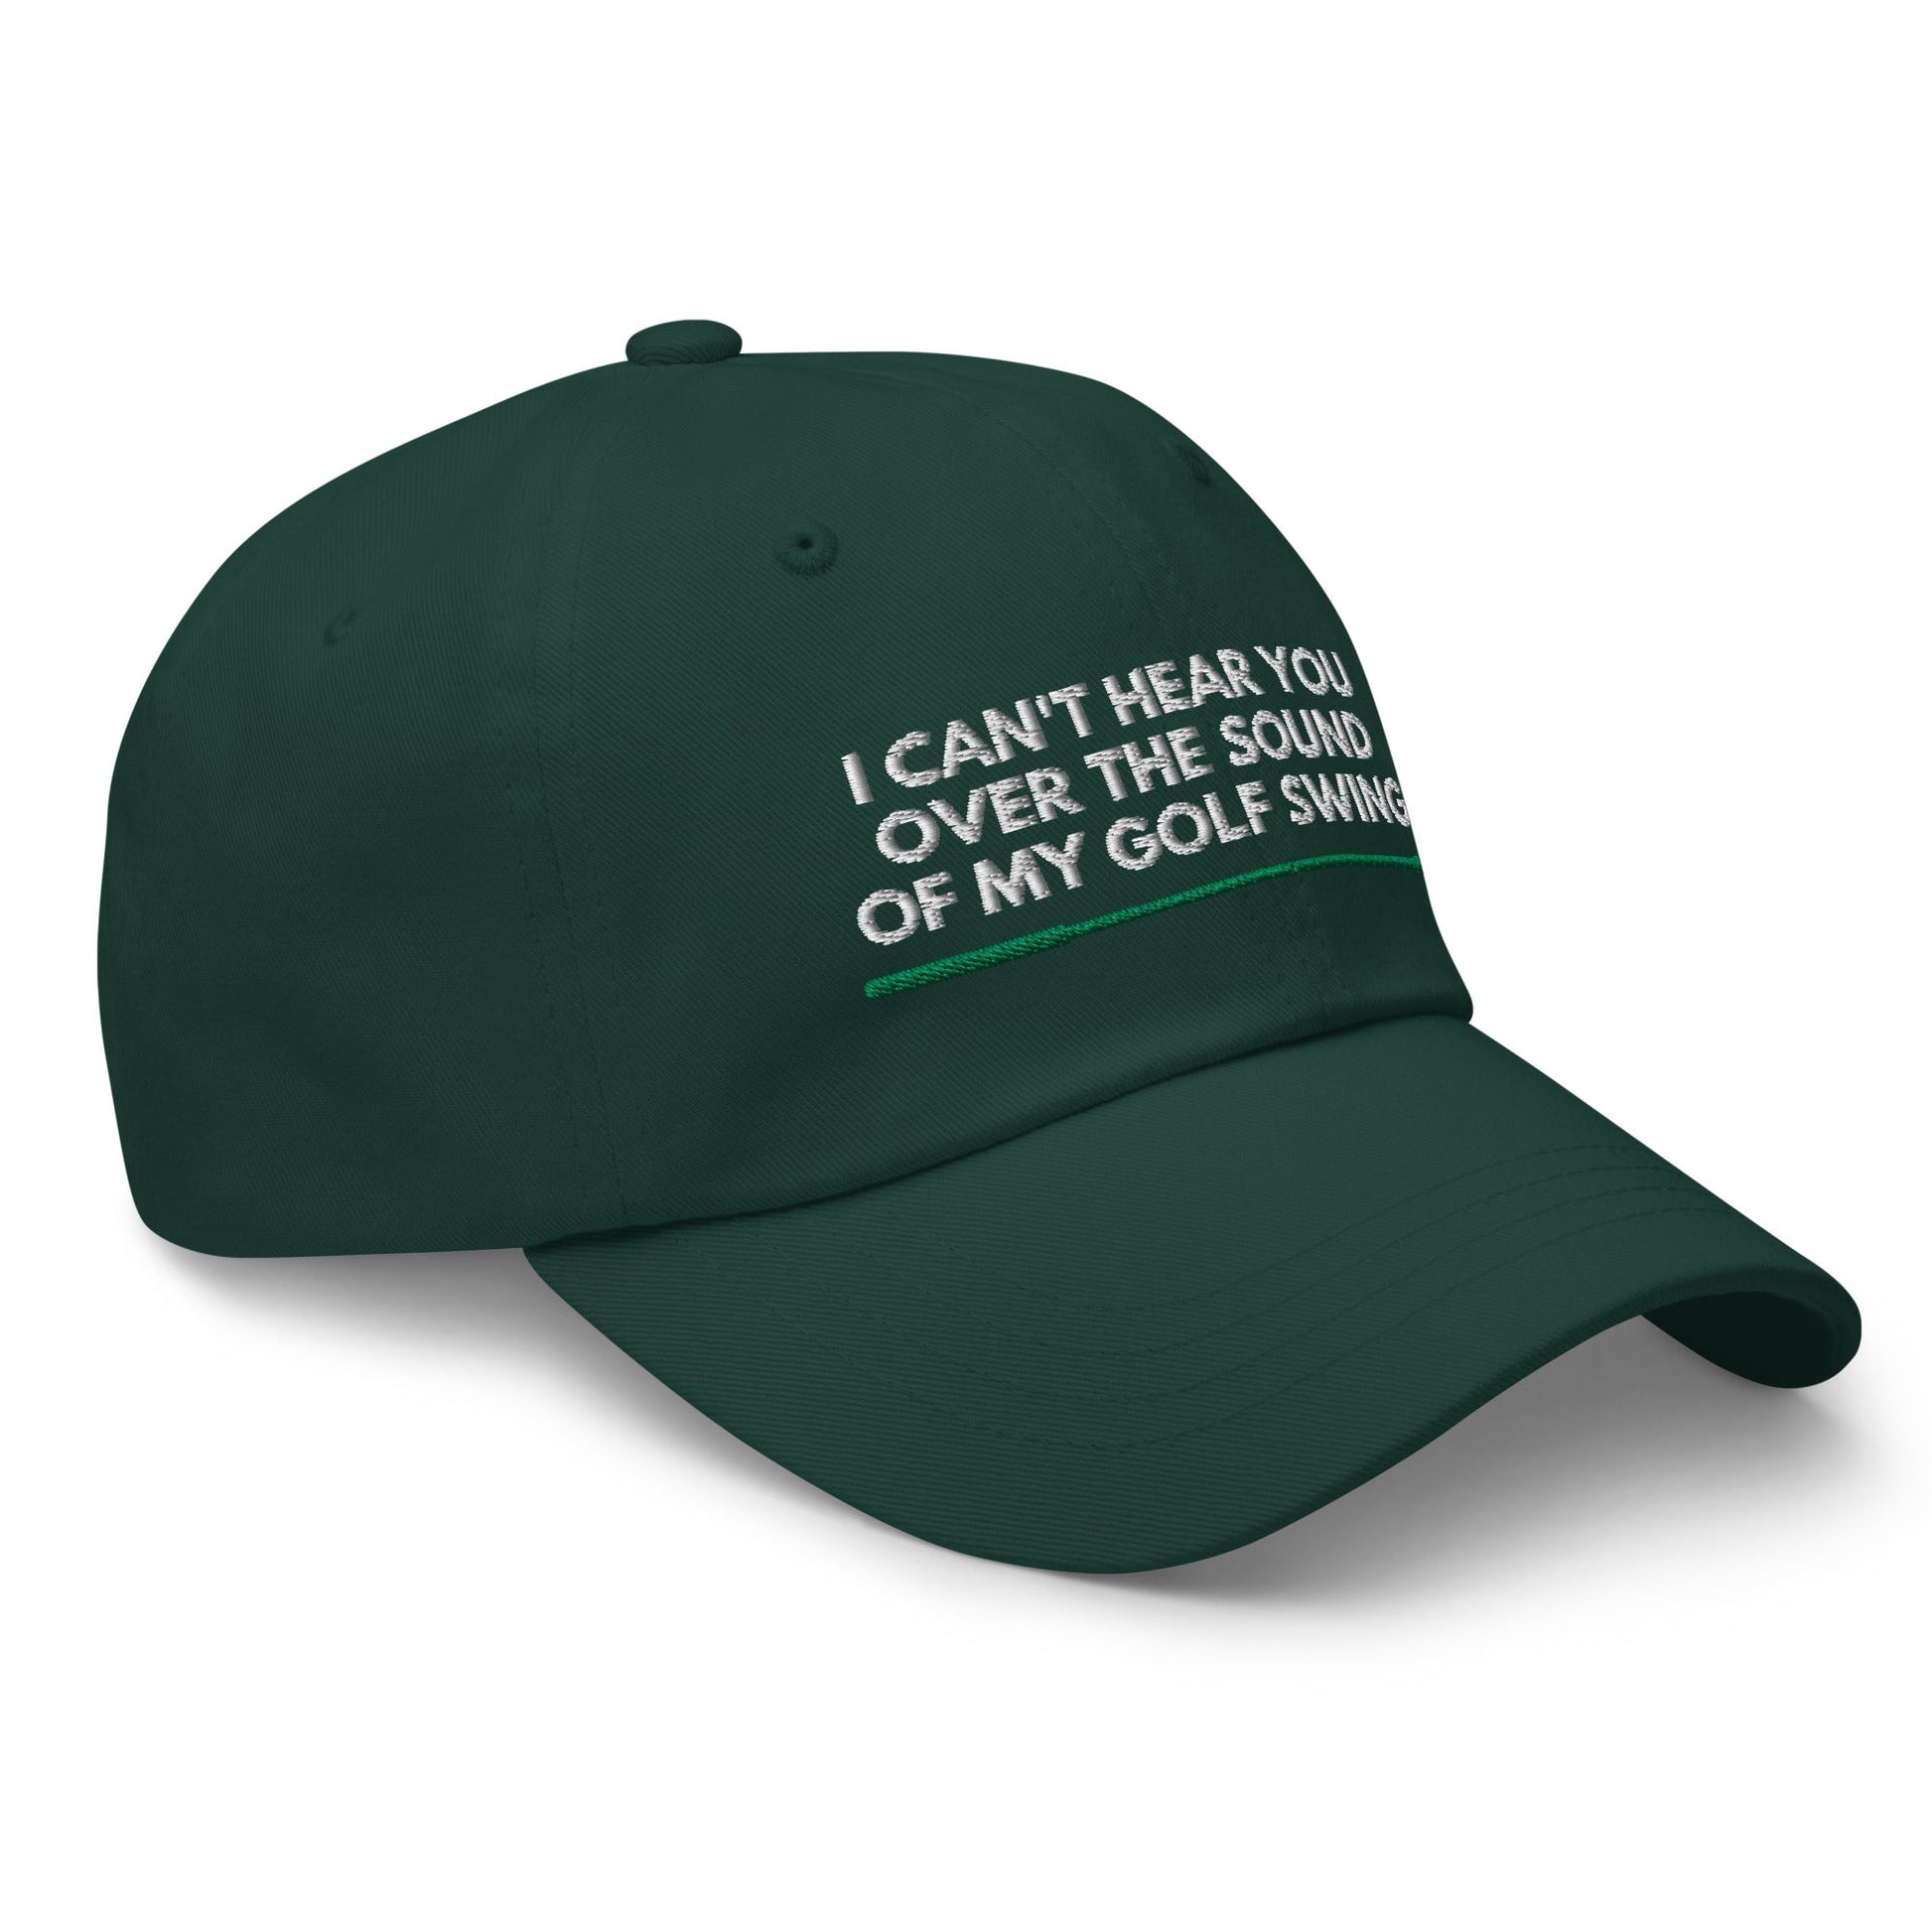 Funny Golfer Gifts  Dad Cap Spruce I Cant Hear You Over The Sound Of My Golf Swing Hat Cap